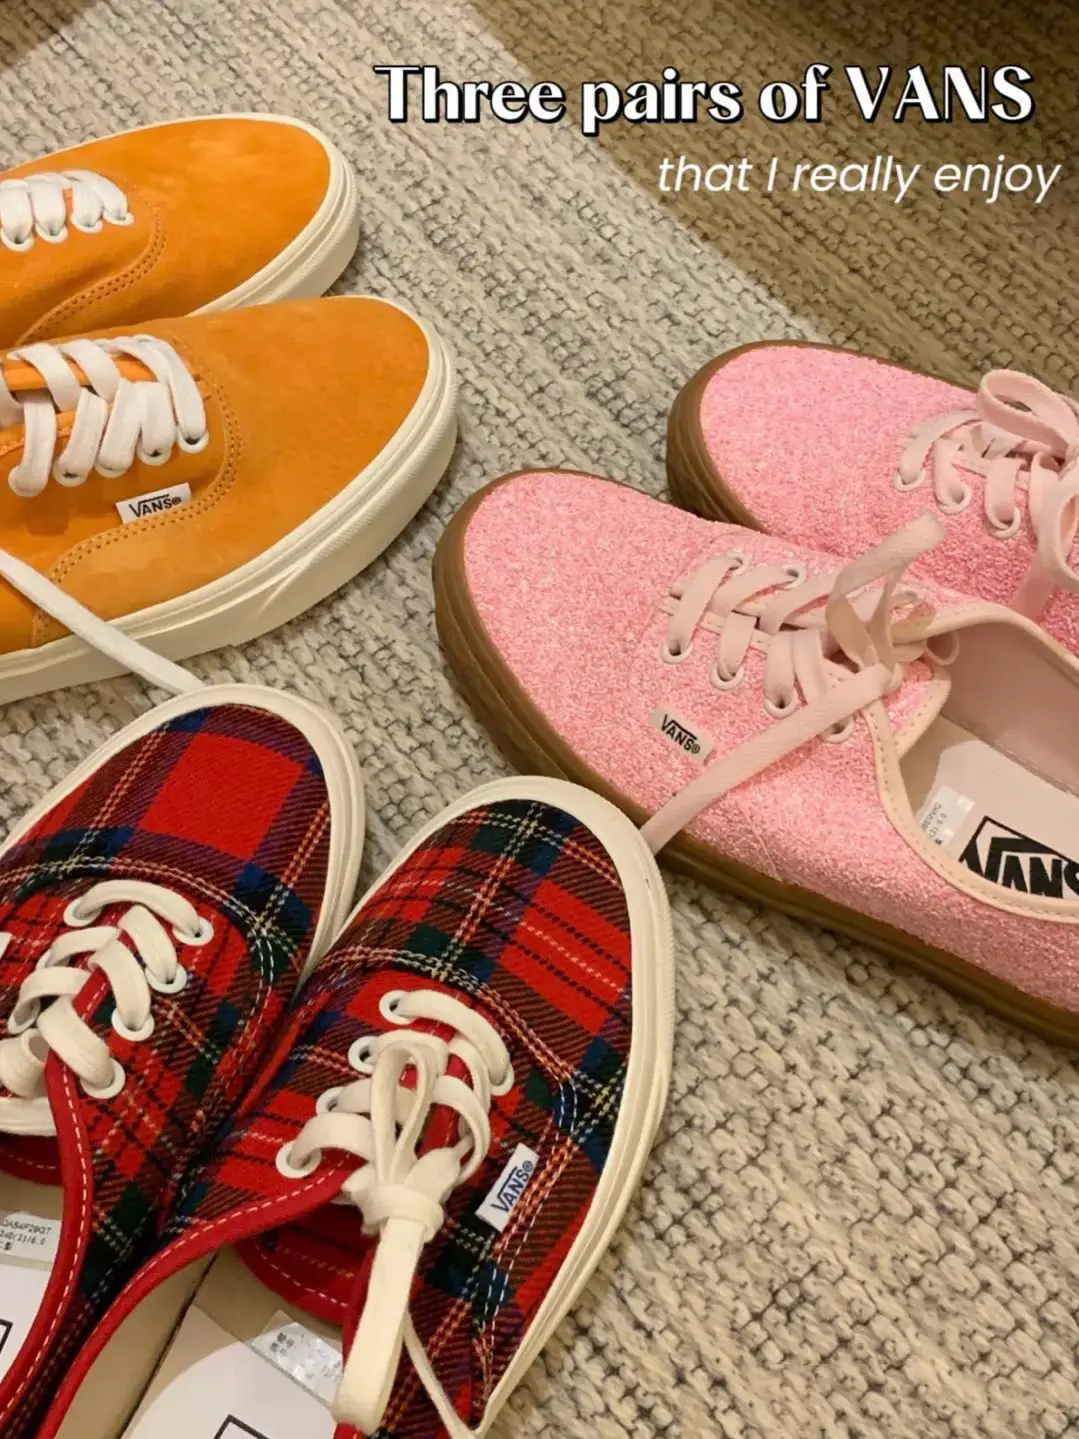 really | I Gallery pairs 3 | posted by Oliviawardrobe vans of Lemon8 that enjoy🫶🏻